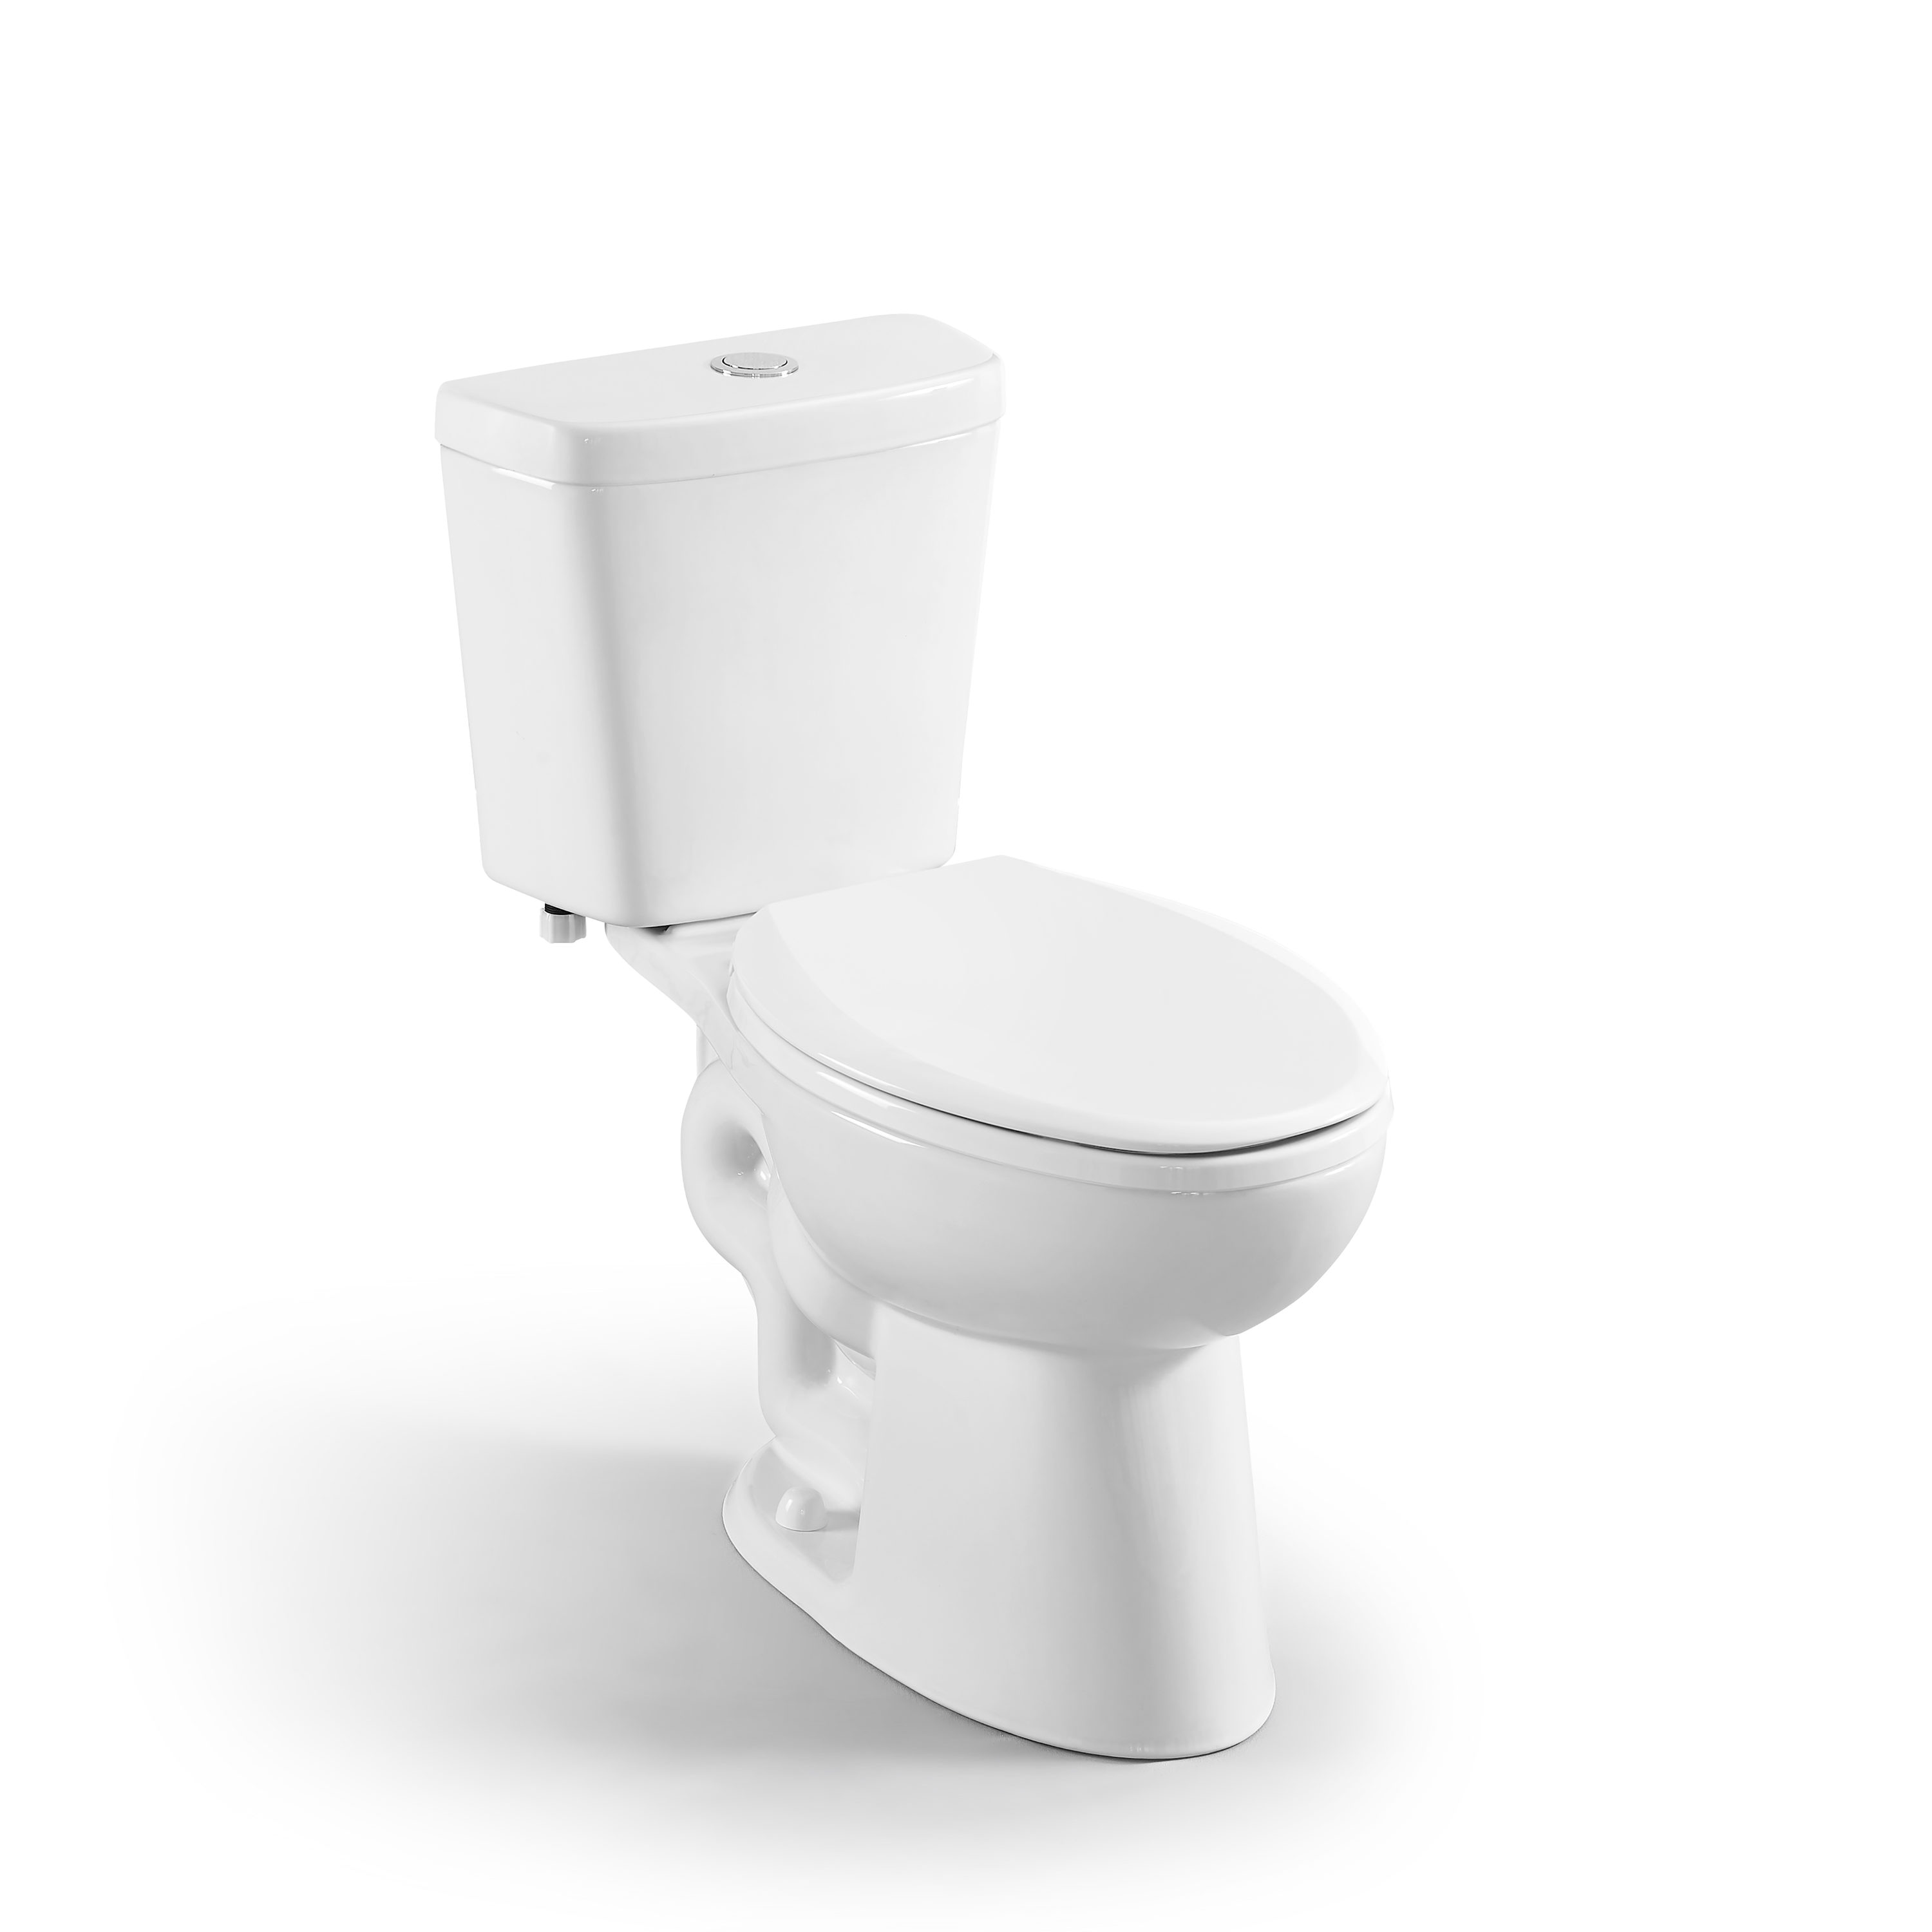 Cadet™ PRO 1.28 gpf/4.0 Lpf 14-Inch Toilet Tank with Tank Cover